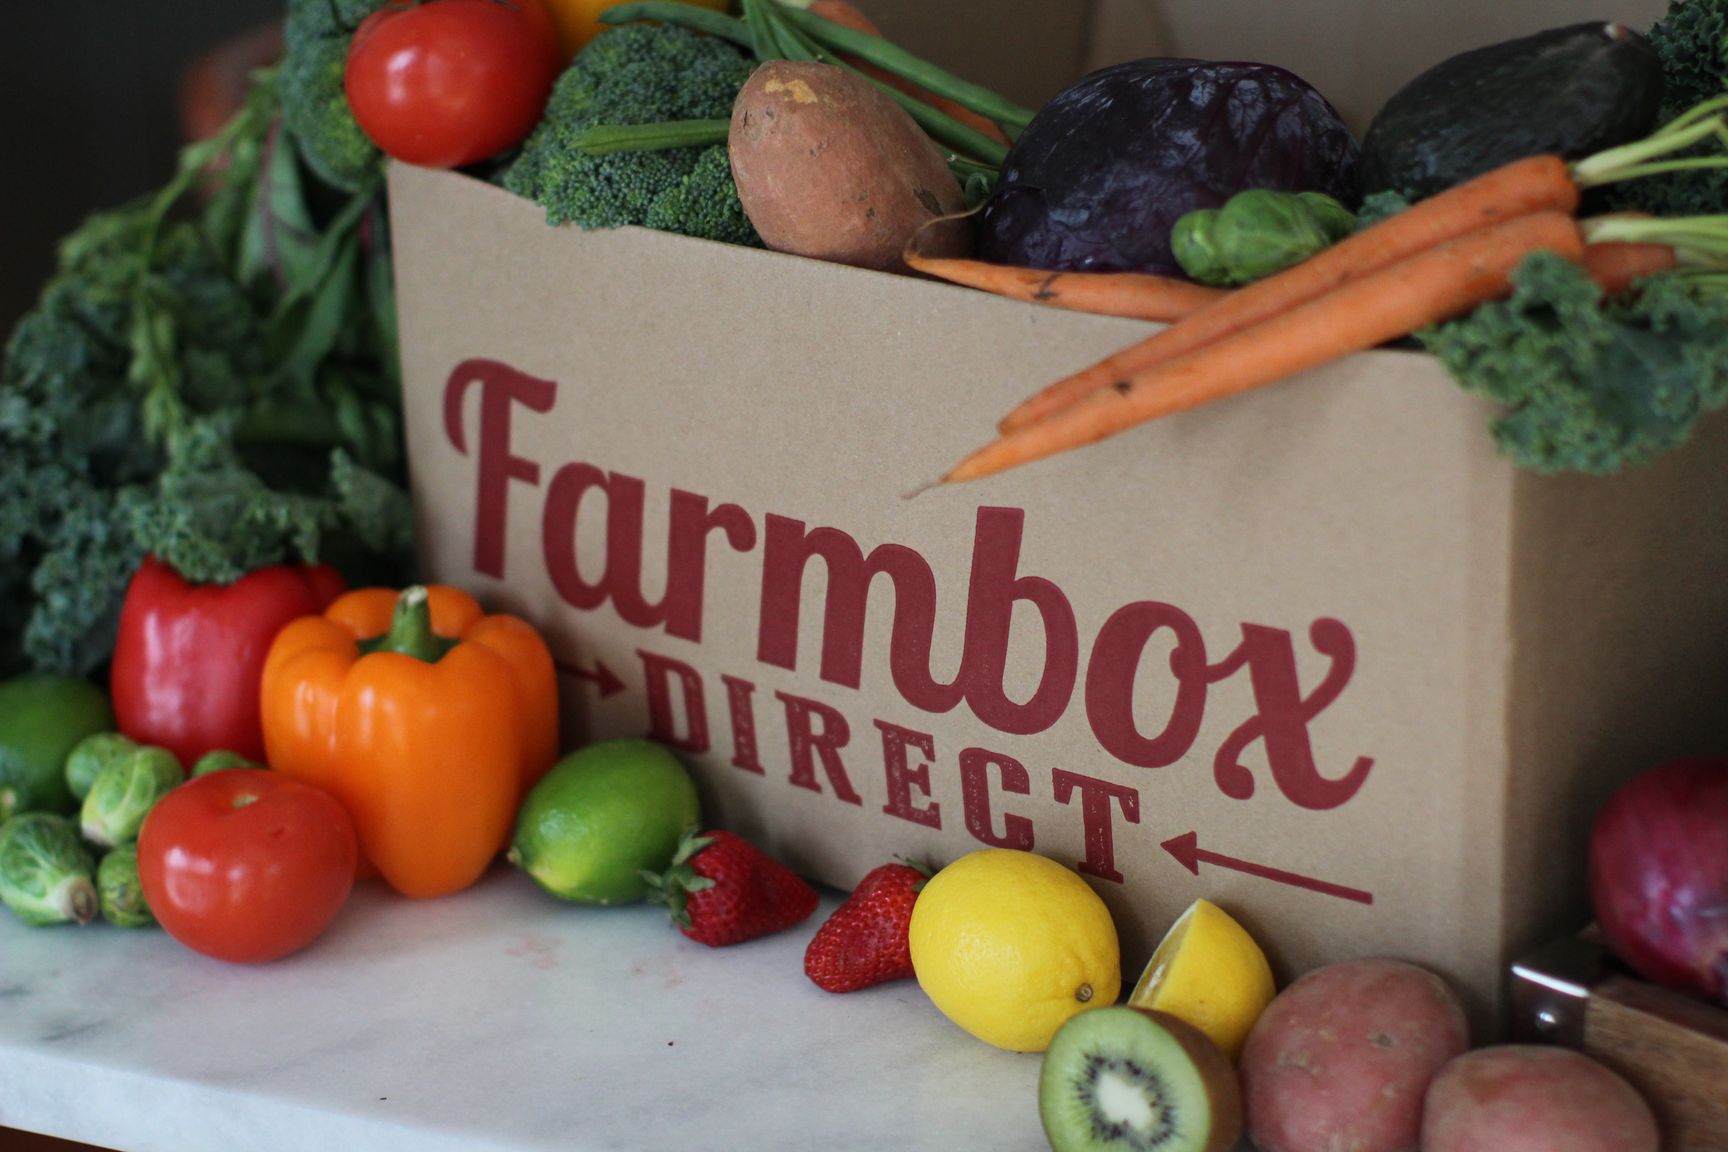 produce box delivery